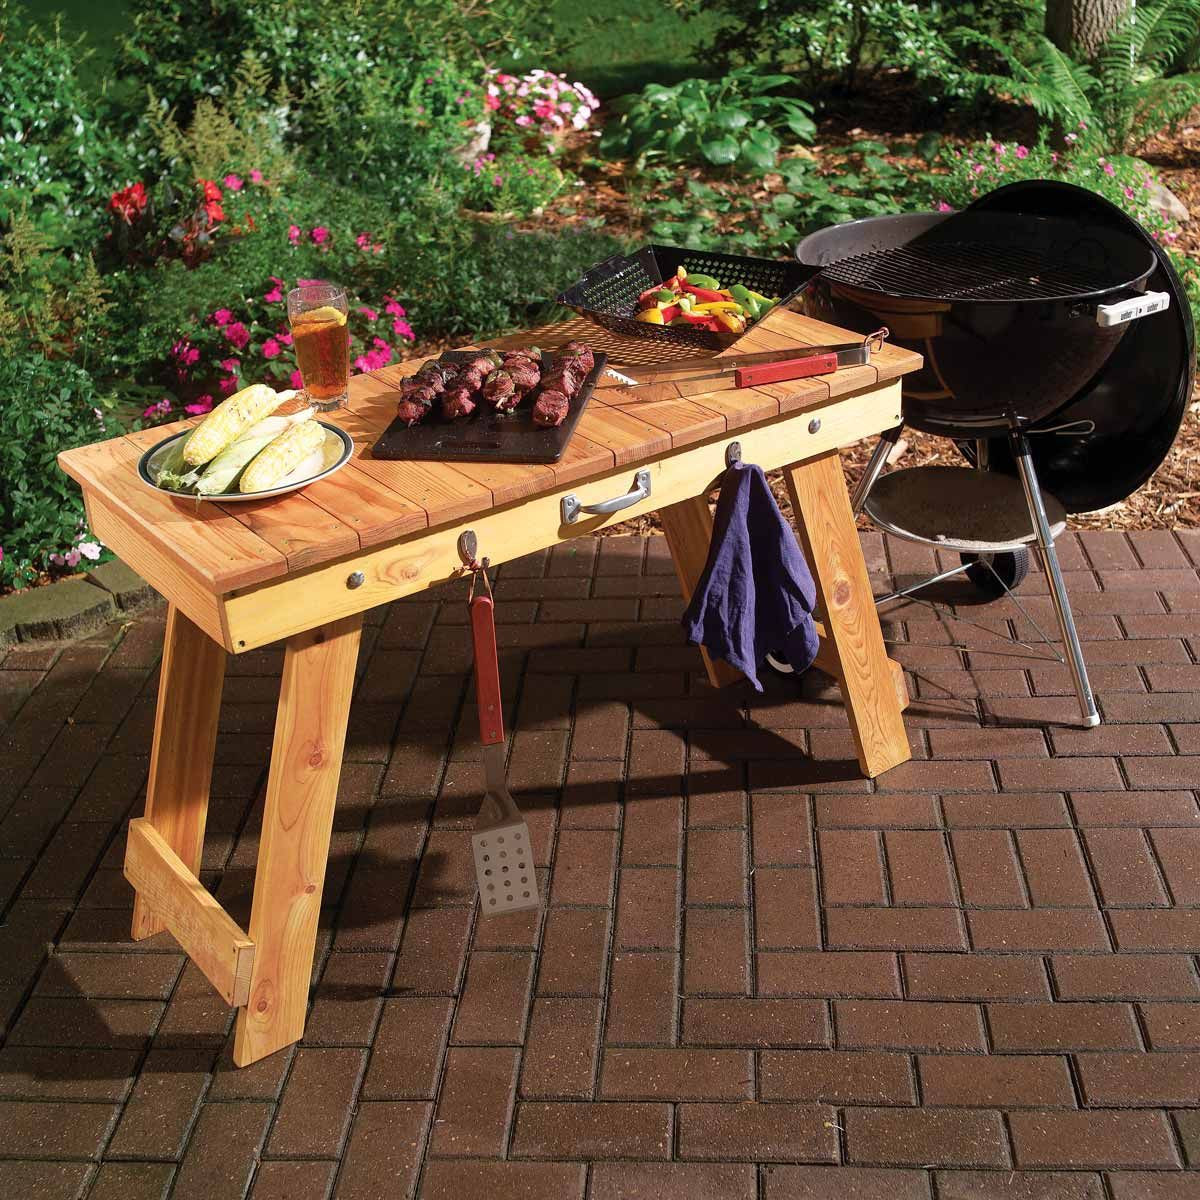 DIY Grill Table Plans
 Fold Up Grill Table